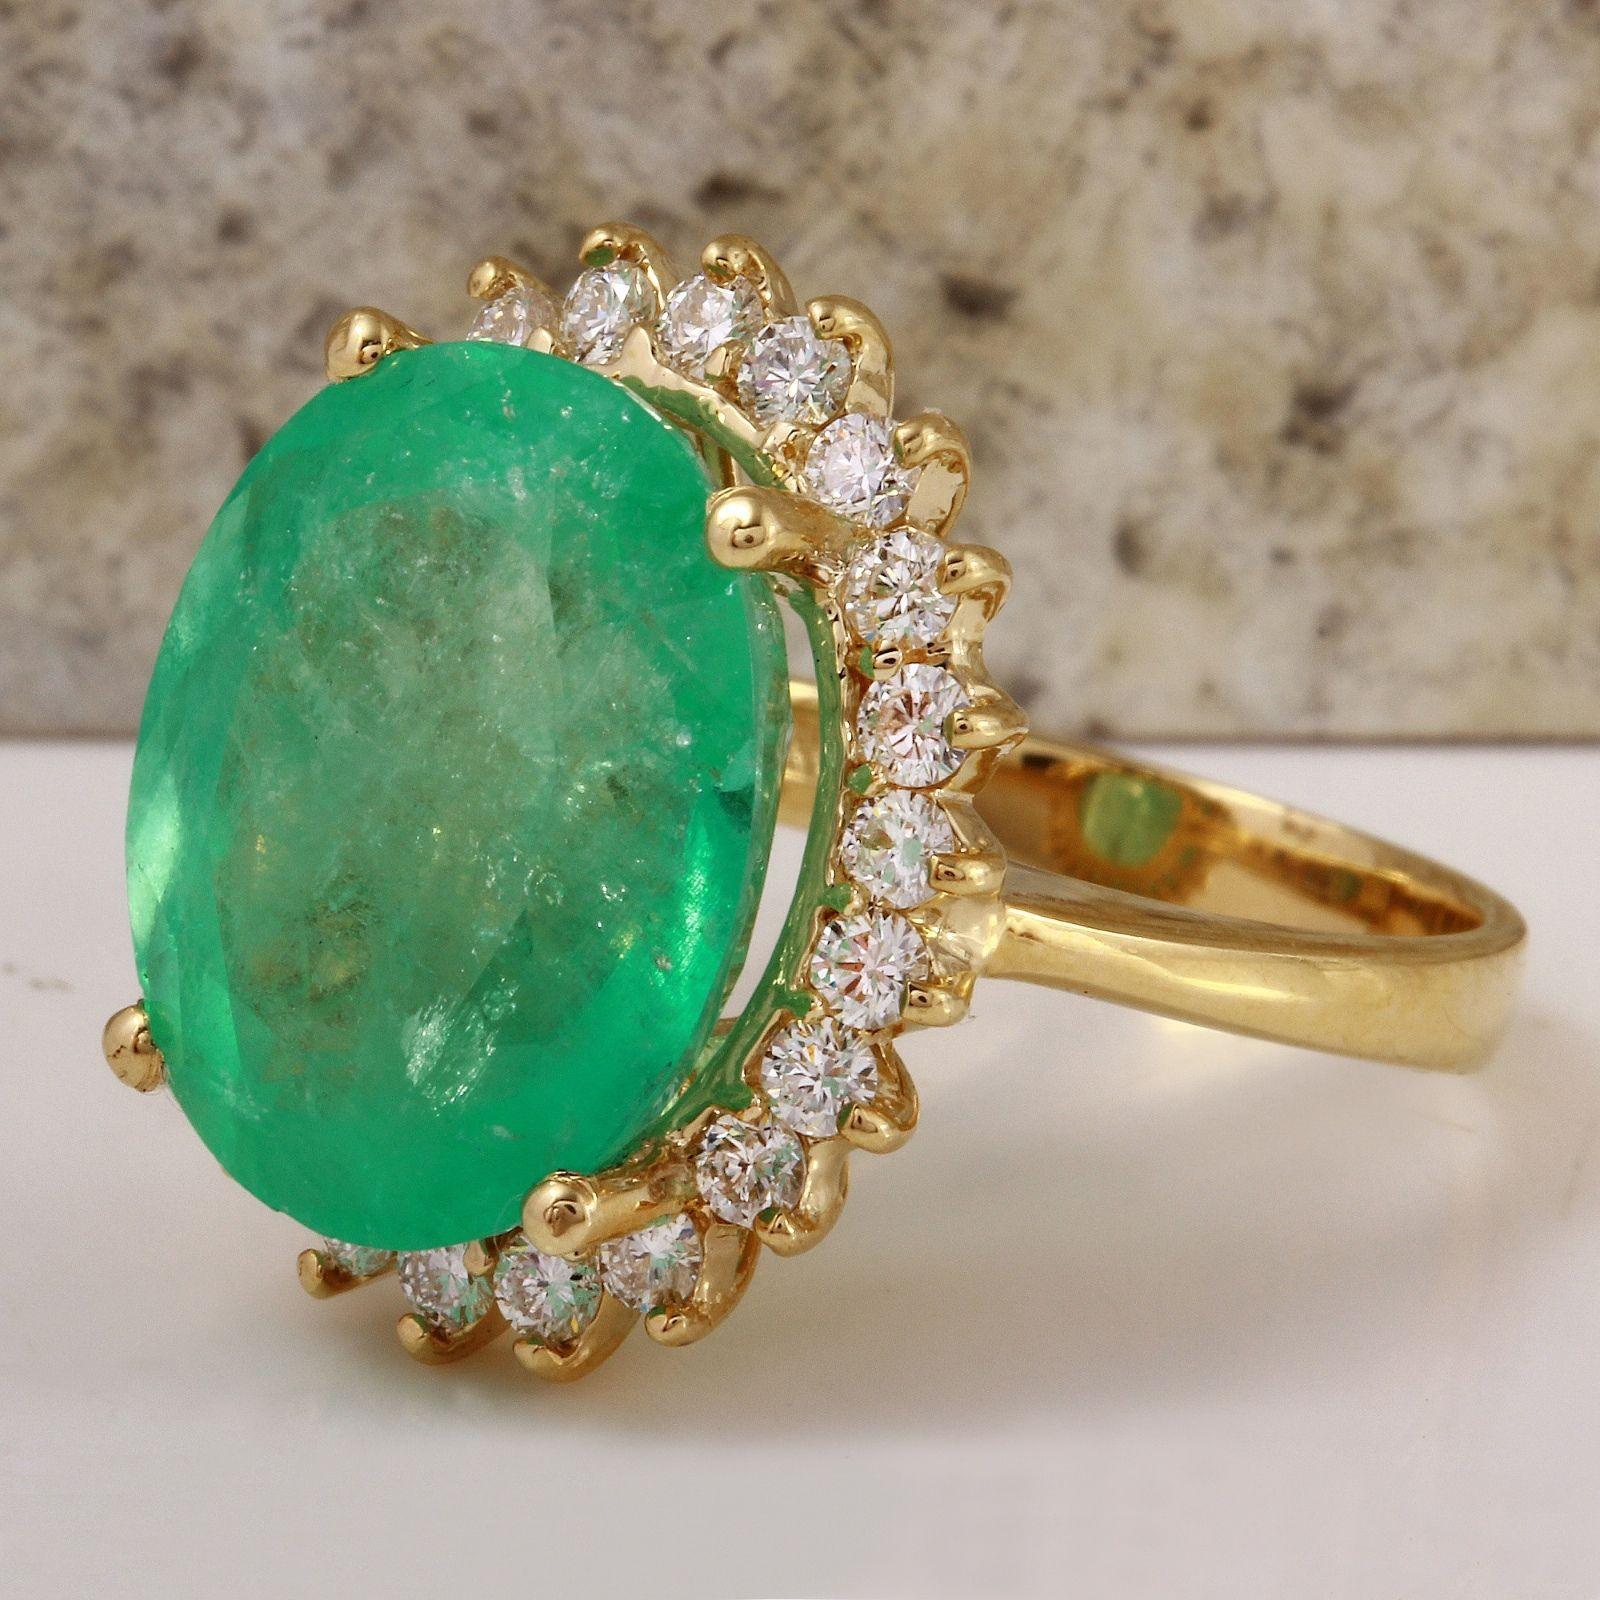 13.00 Carats Natural Emerald and Diamond 14K Solid Yellow Gold Ring

Total Natural Green Emerald Weight is: 12.00 Carats (transparent)

Emerald Measures: 16.27 x 14.42mm

Natural Round Diamonds Weight: 1.00 Carats (color G / Clarity VS2-SI1)

Ring